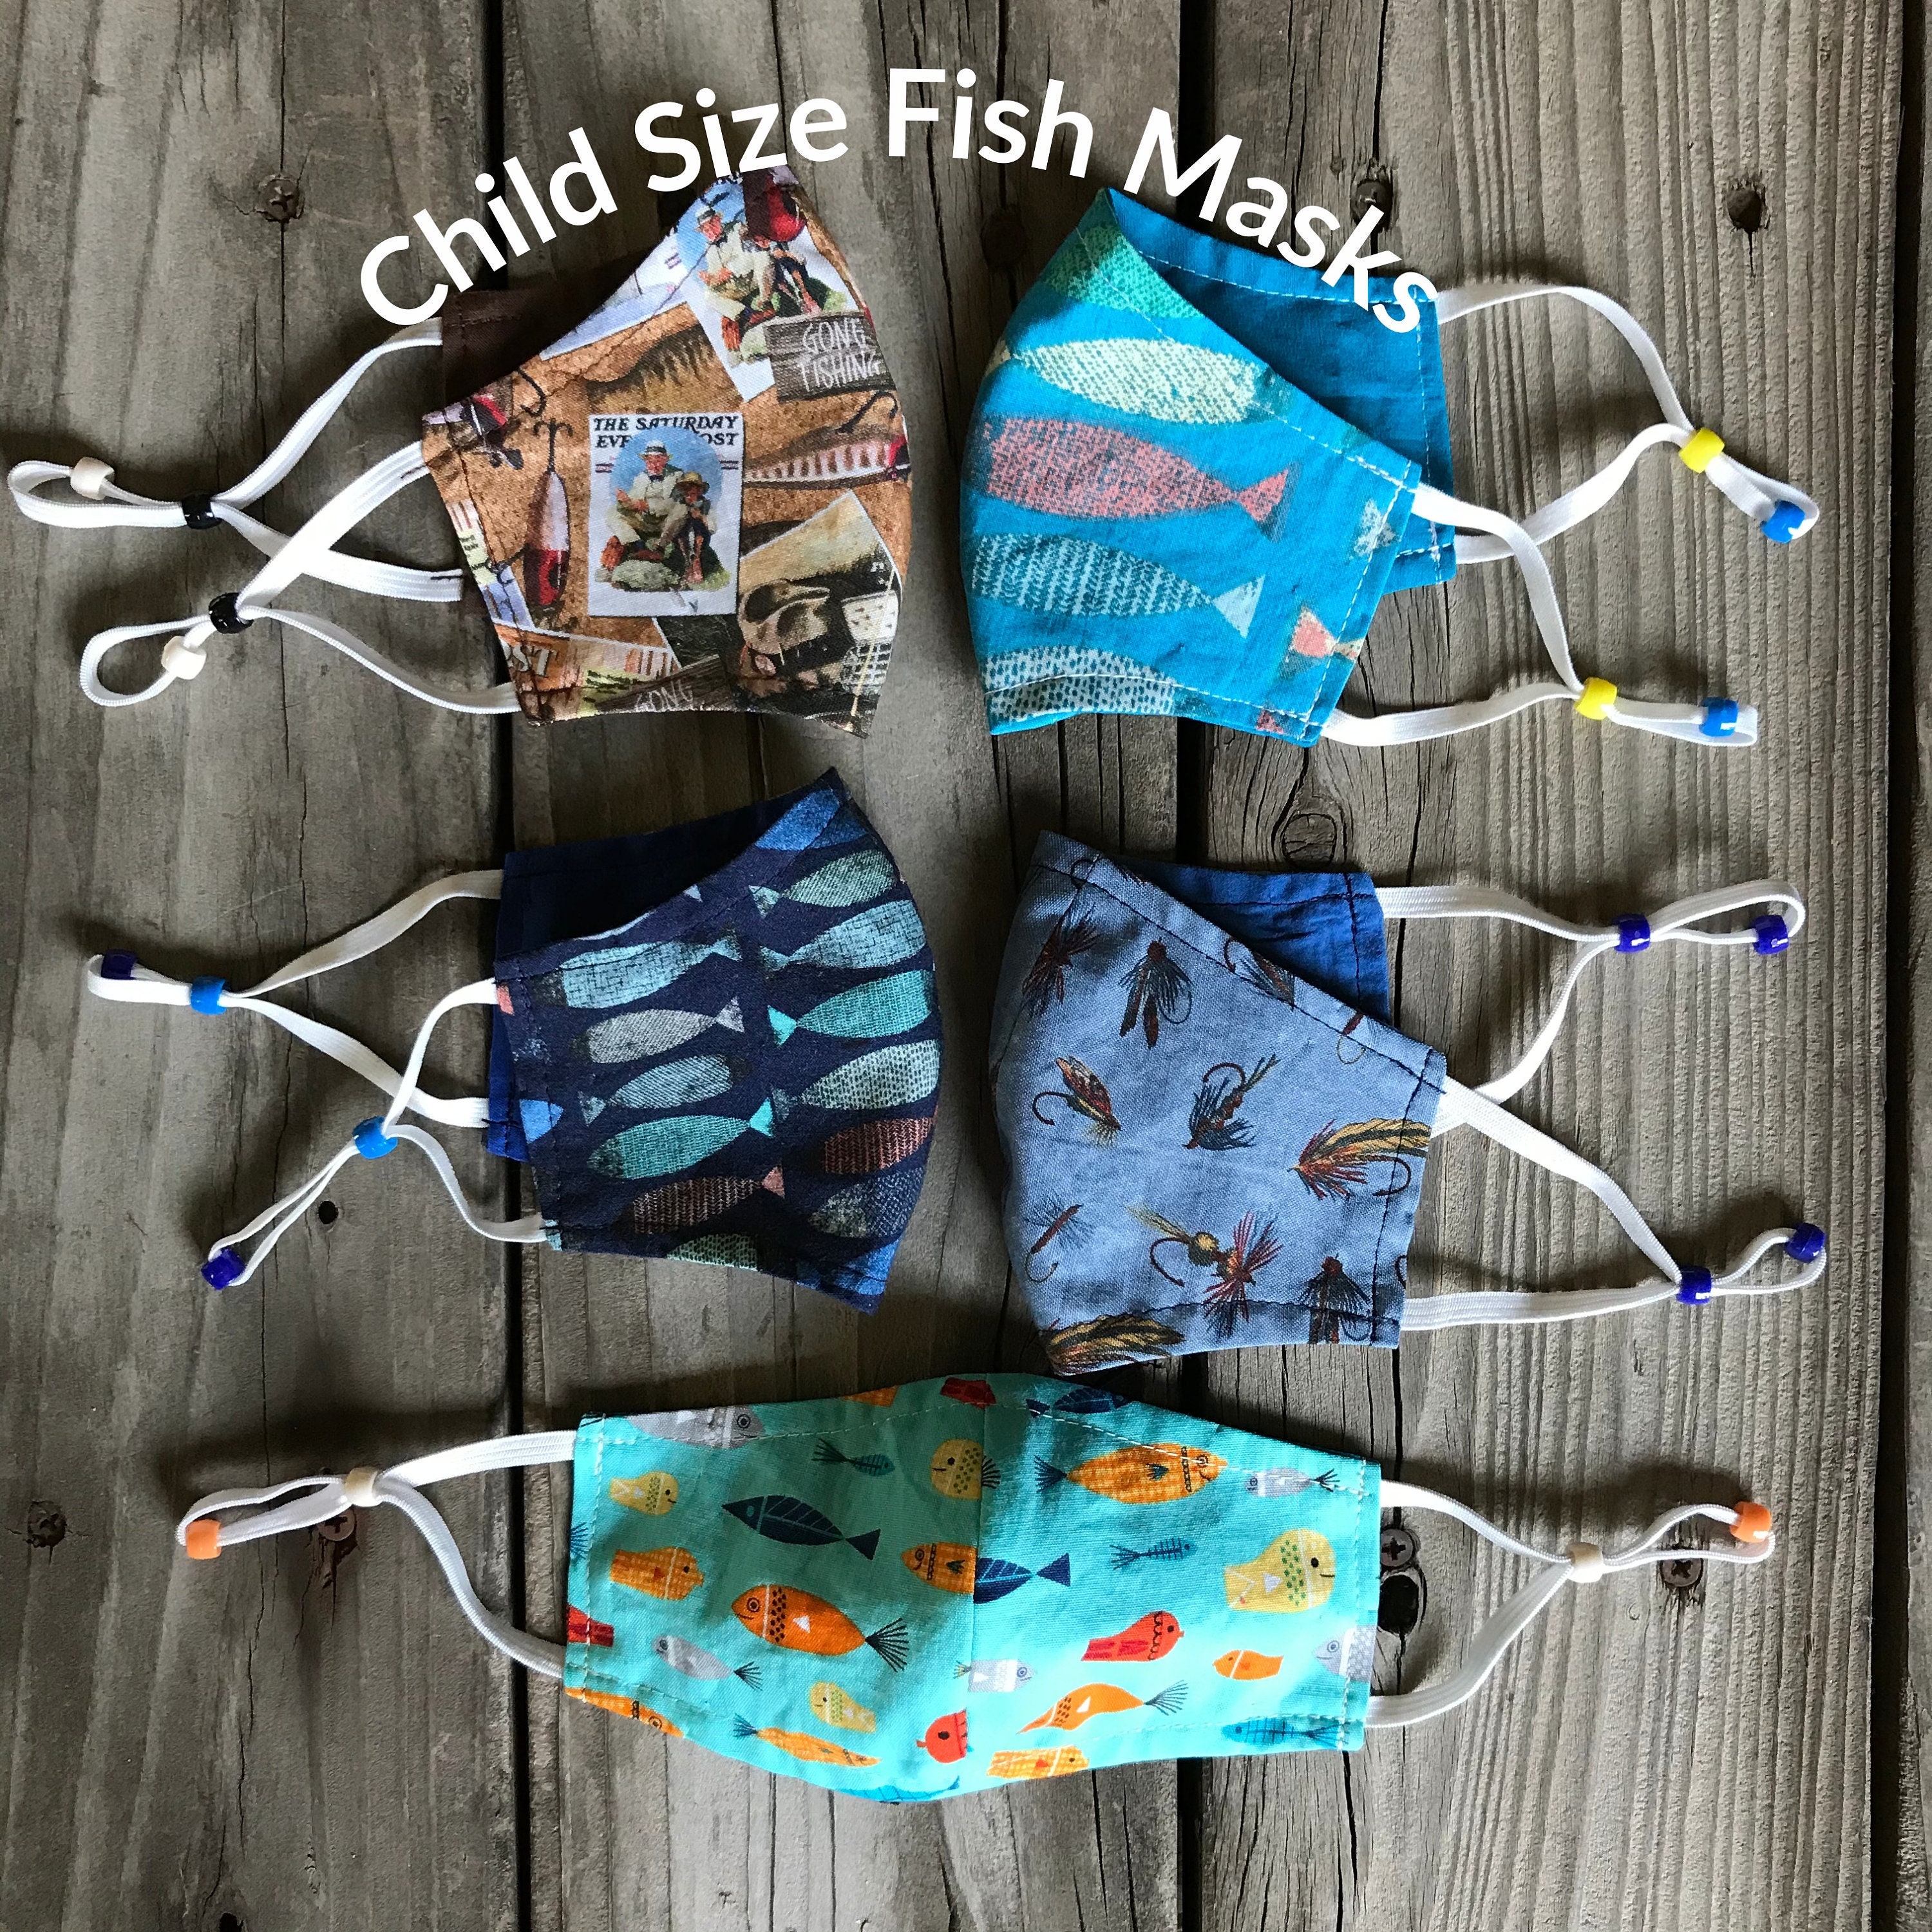 Fishing Face Mask for Kids, Adjustable Elastic Trout Mask for Kids, Fishing  Buddy Gift, Child Size Mask, Fishing Stocking Stuffer for Kids -  Canada